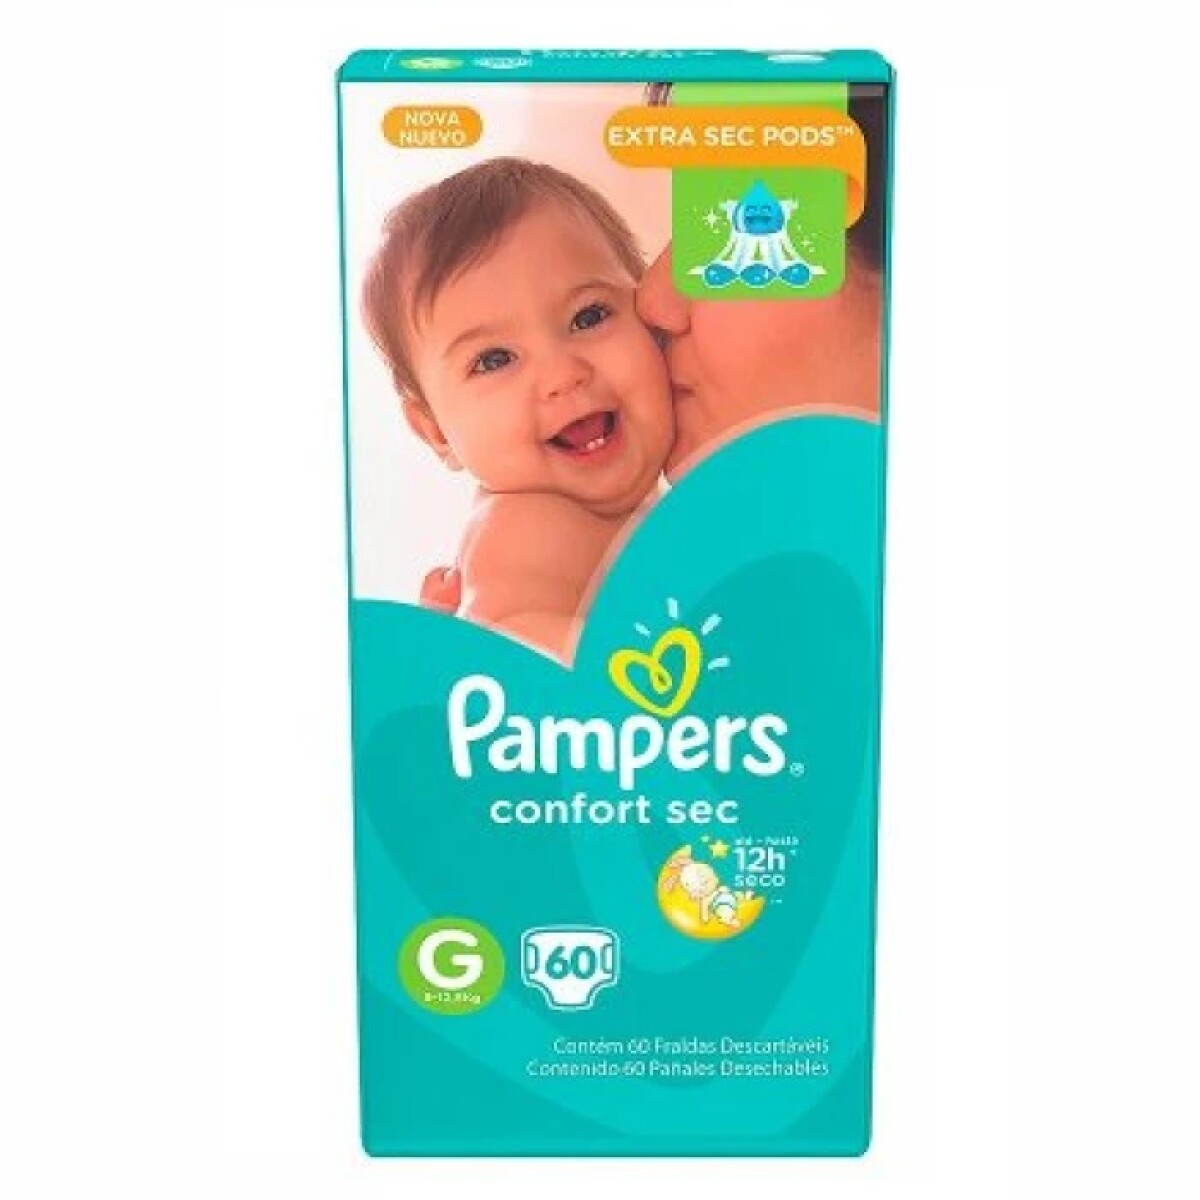 Pañales Pampers Confort Sec Talle G 60 Uds. 